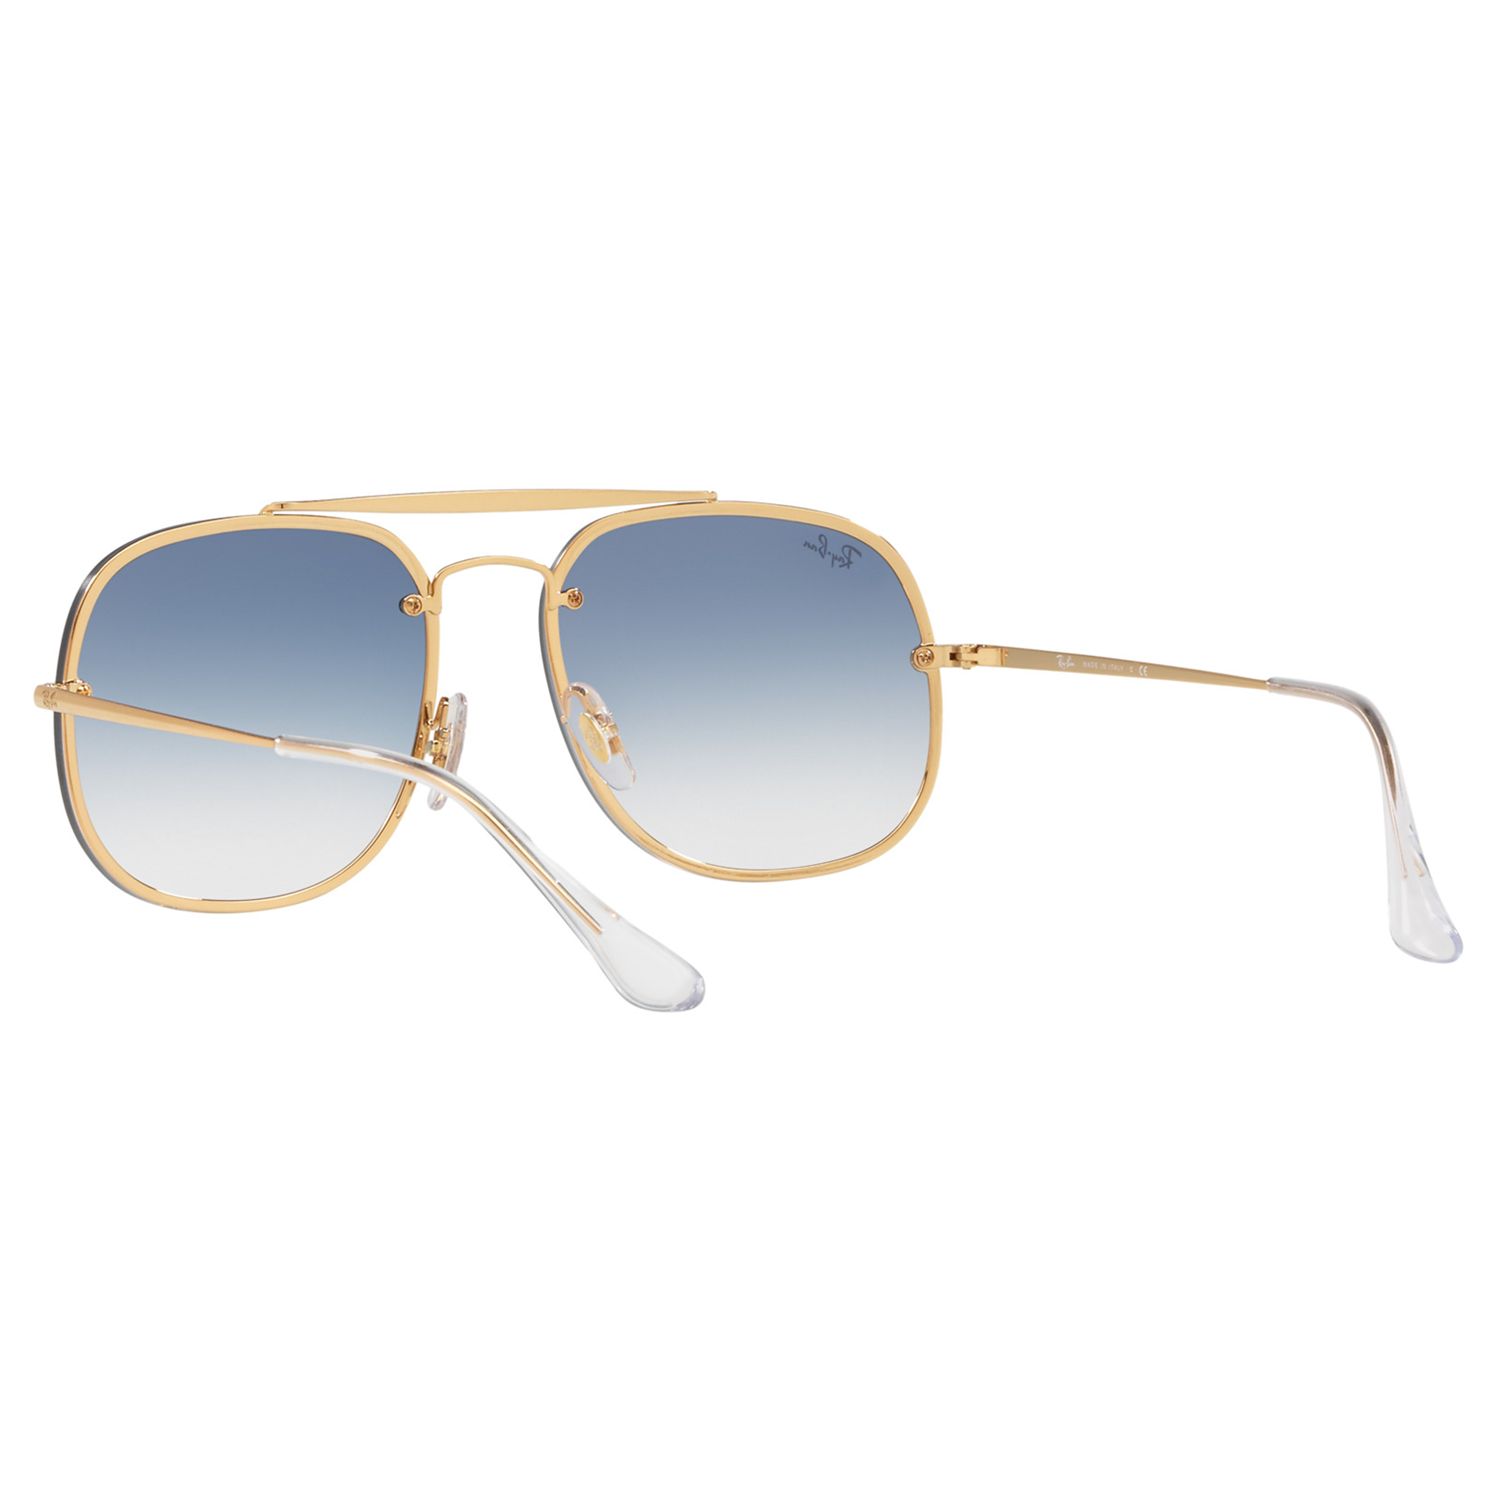 Ray-Ban RB3583 Unisex Square Sunglasses, Gold/Blue